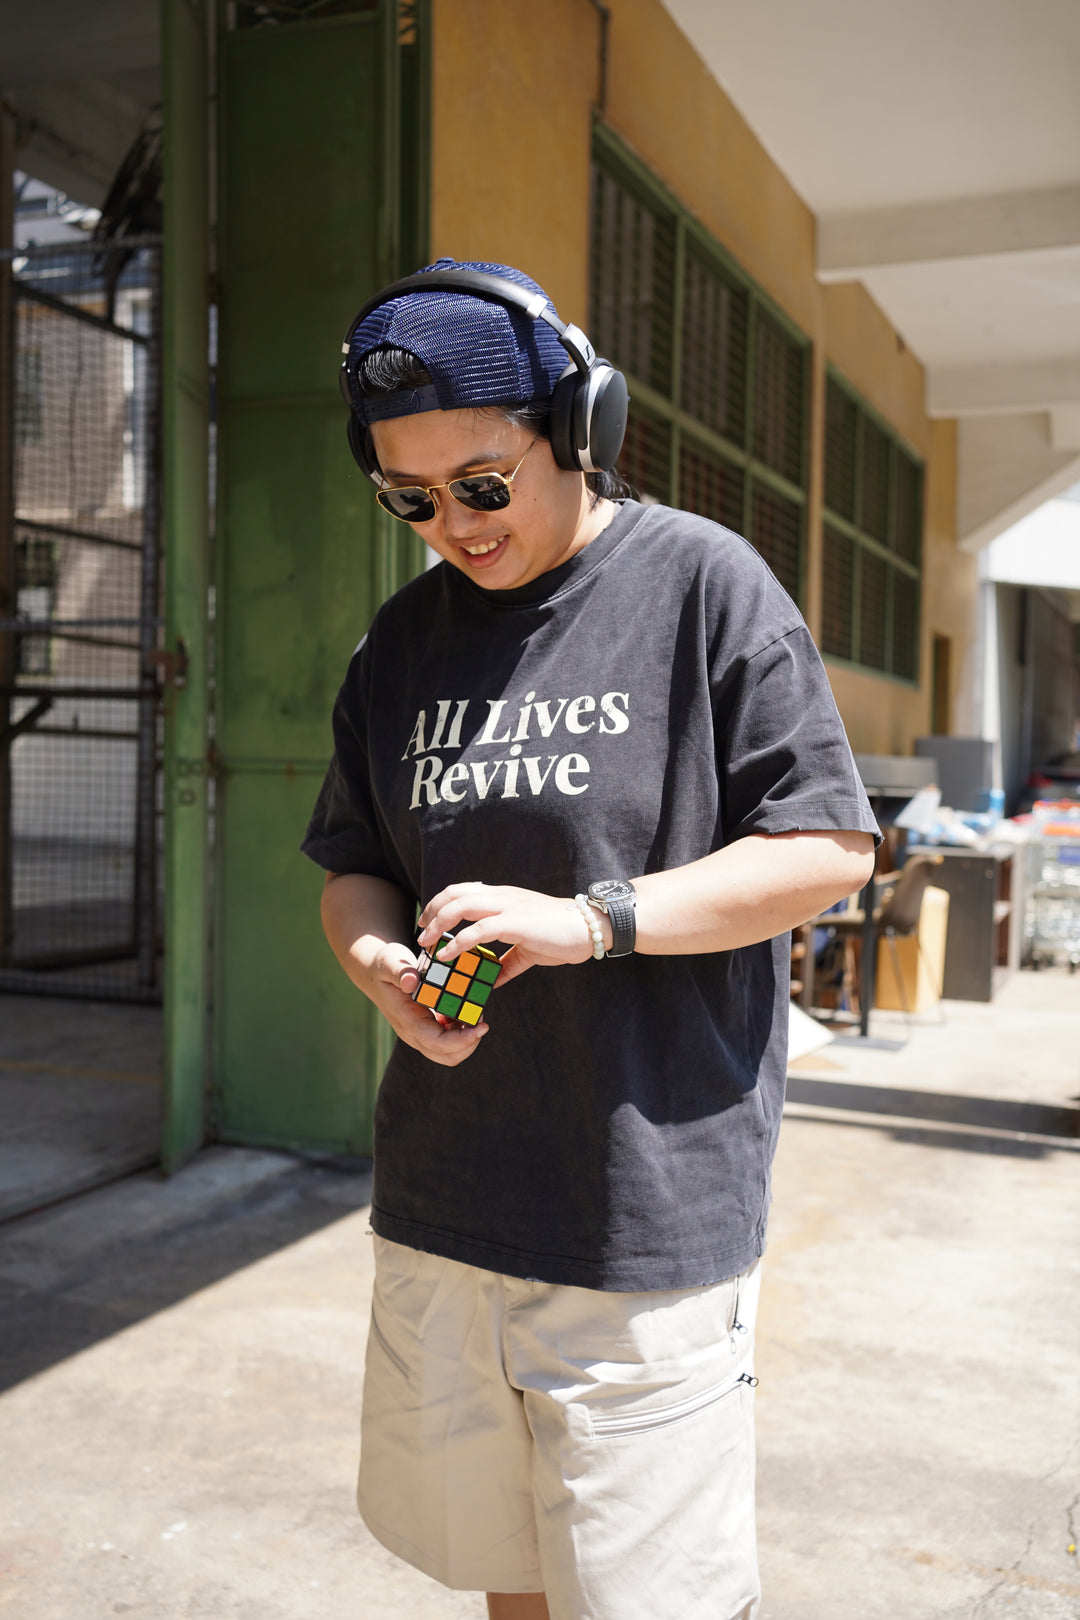 All Lives Revive Print Tee